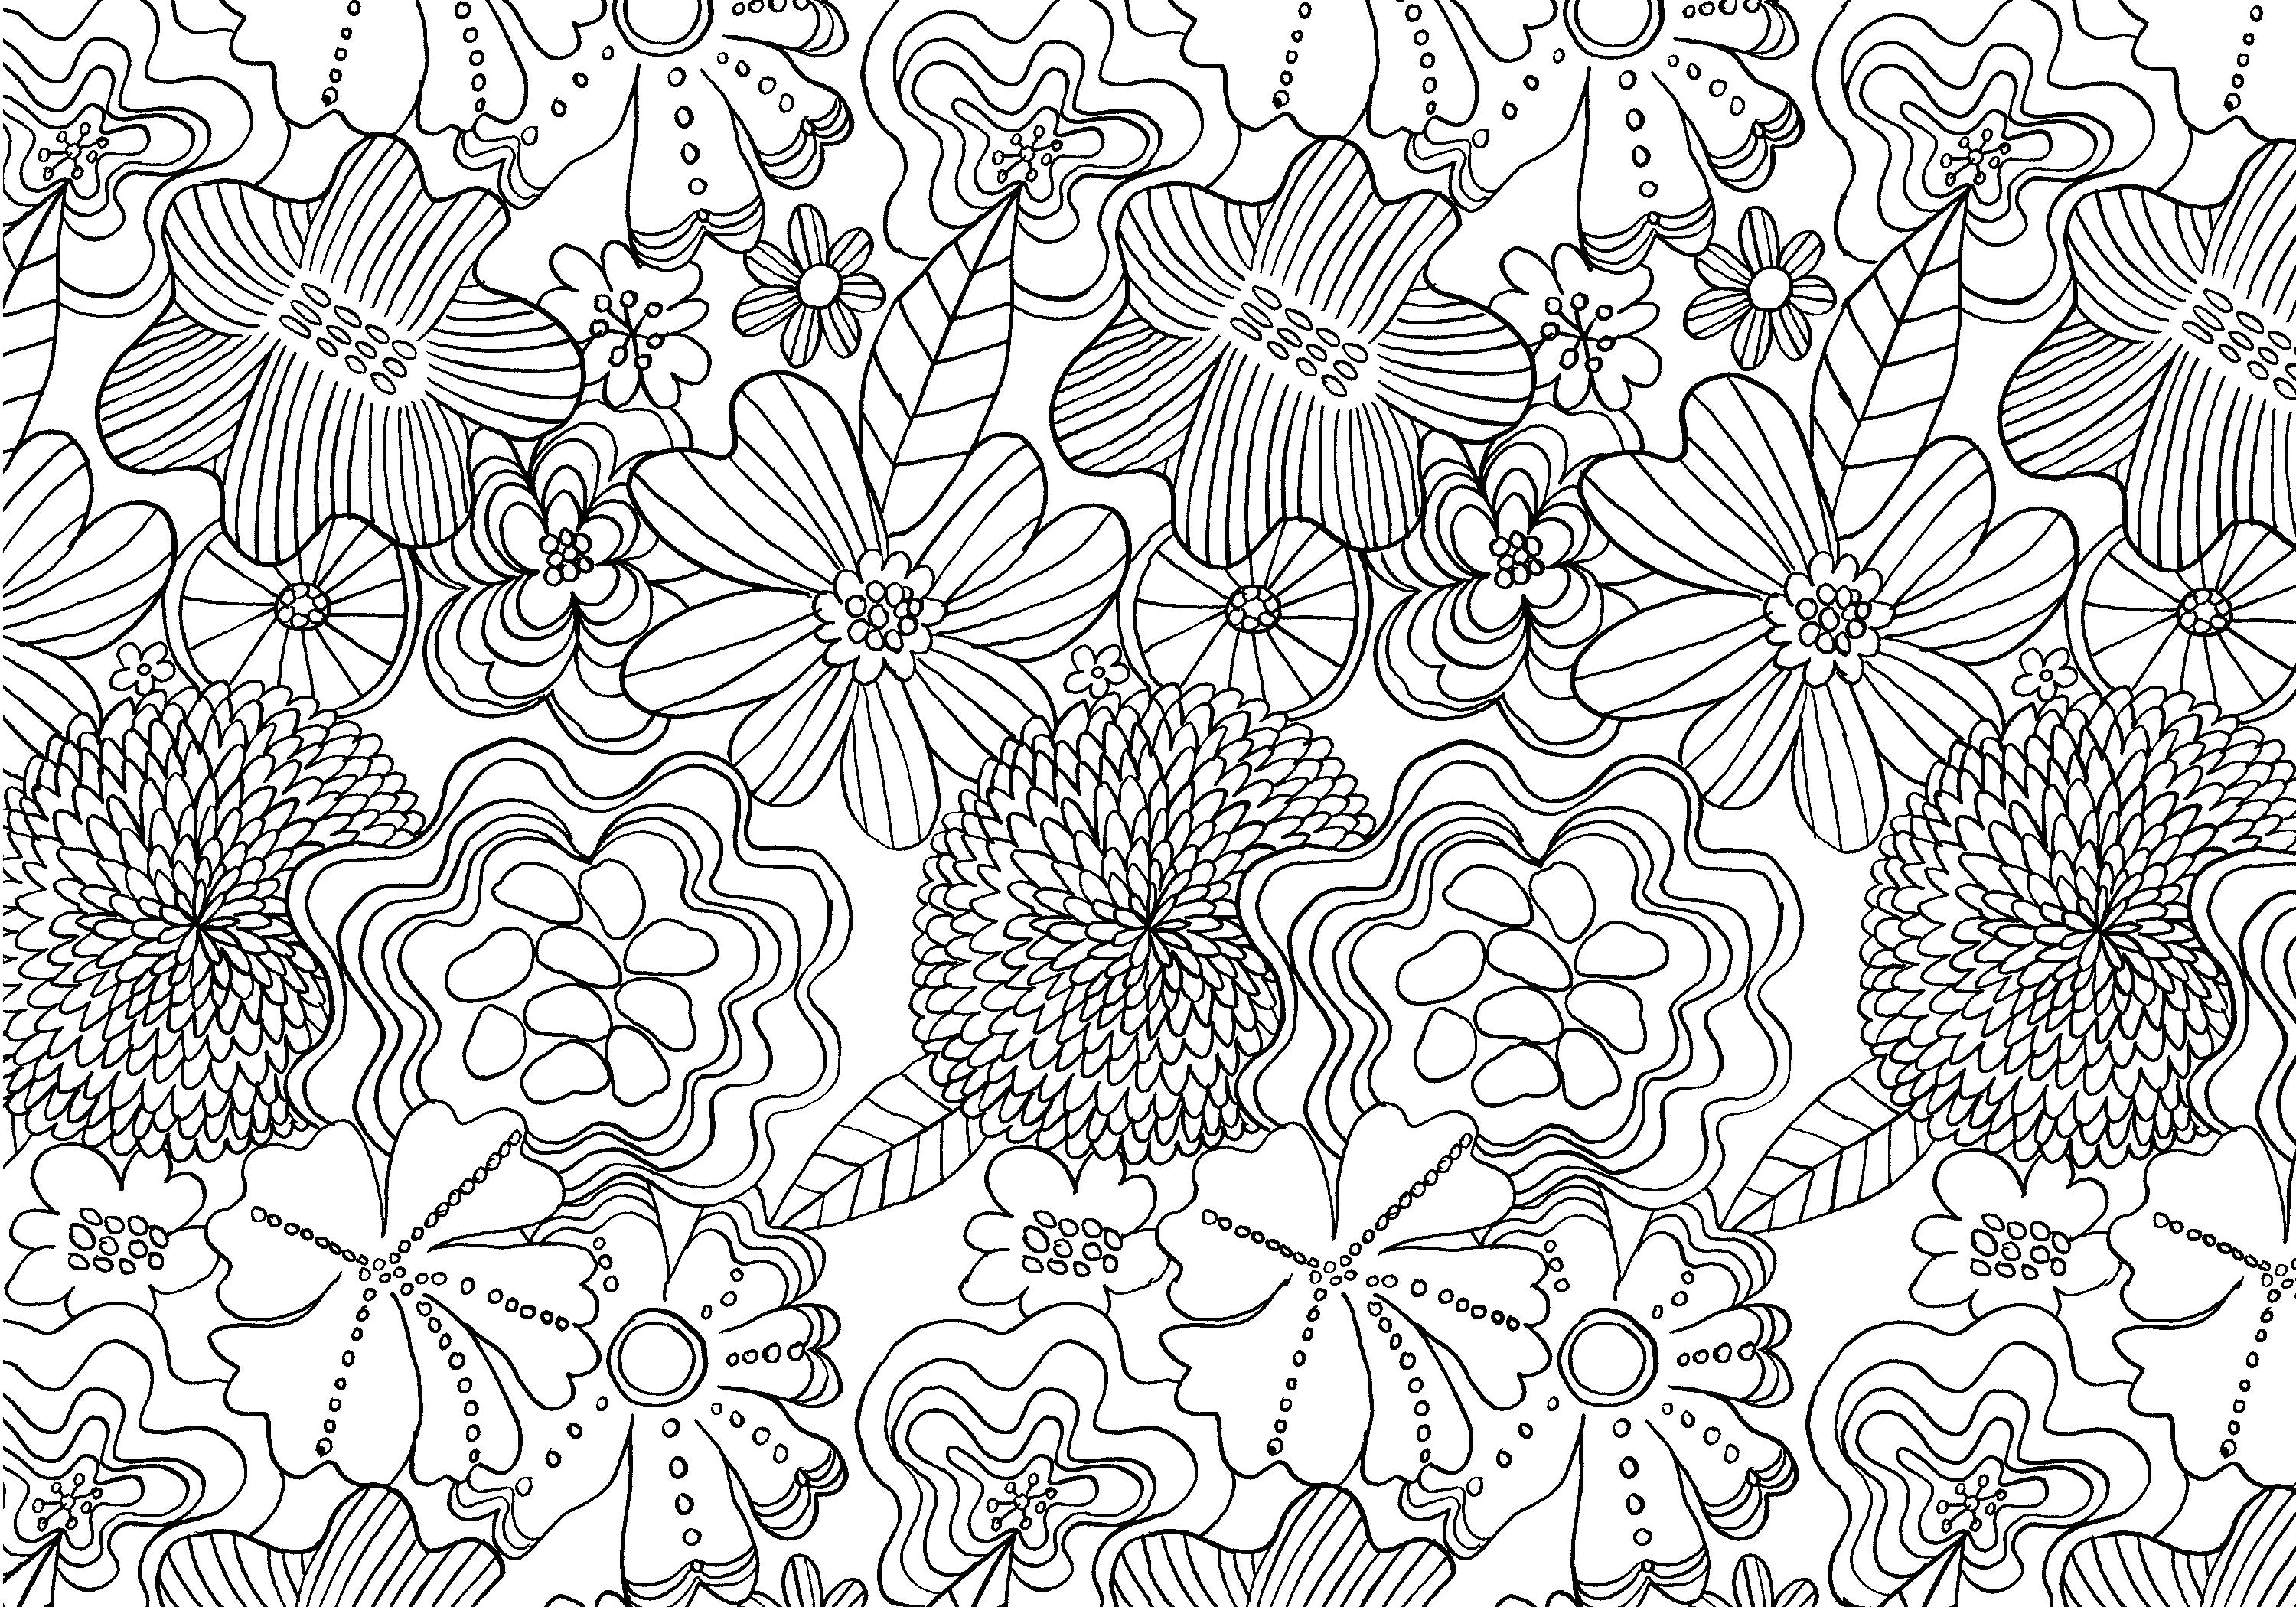 The Mindfulness Coloring Book    